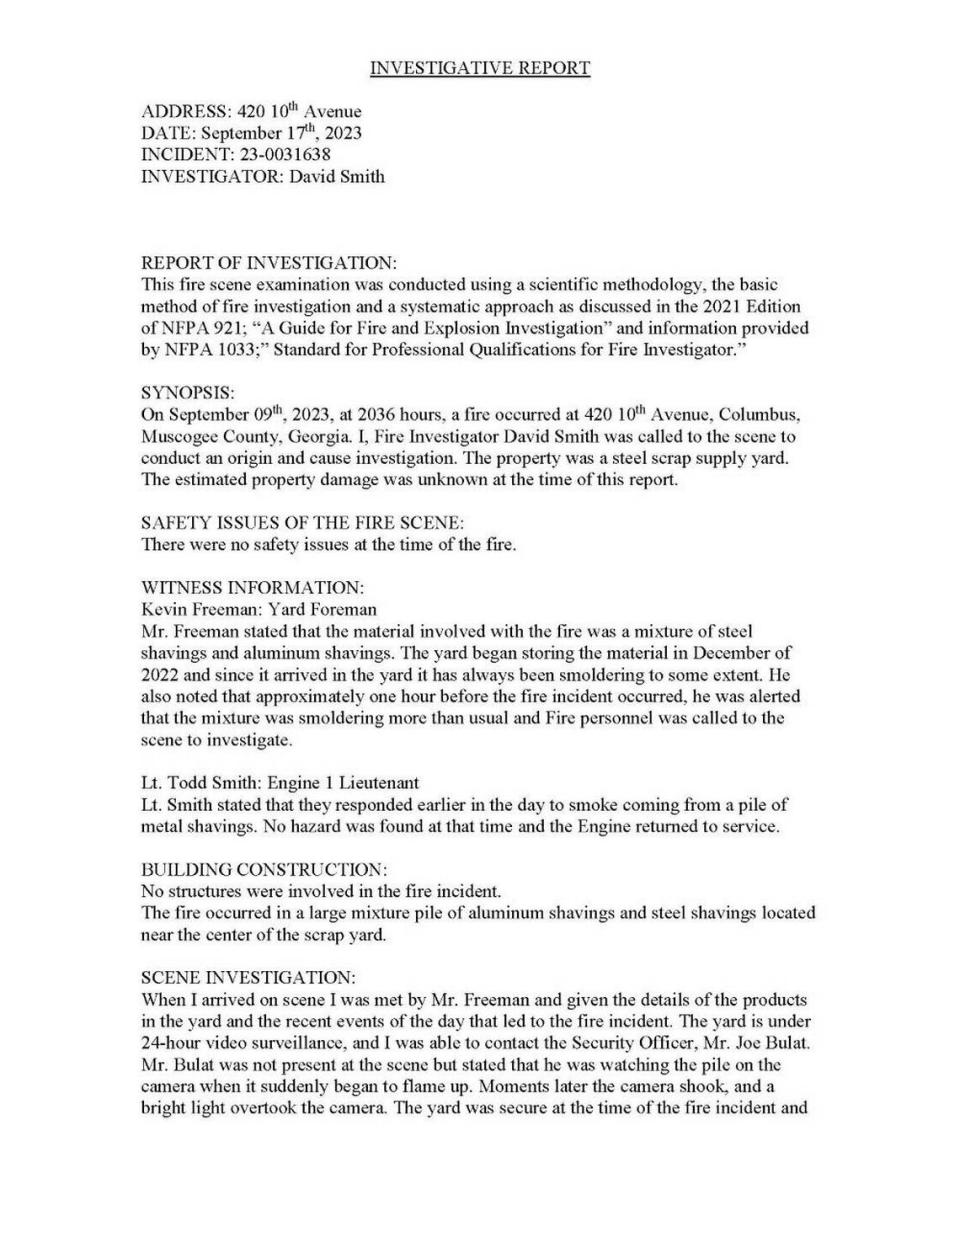 Page 1 of the Investigative Report filed by David Smith of Columbus Fire for the incident at 420 10th Ave., Columbus, Georgia on September 17th, 2023.